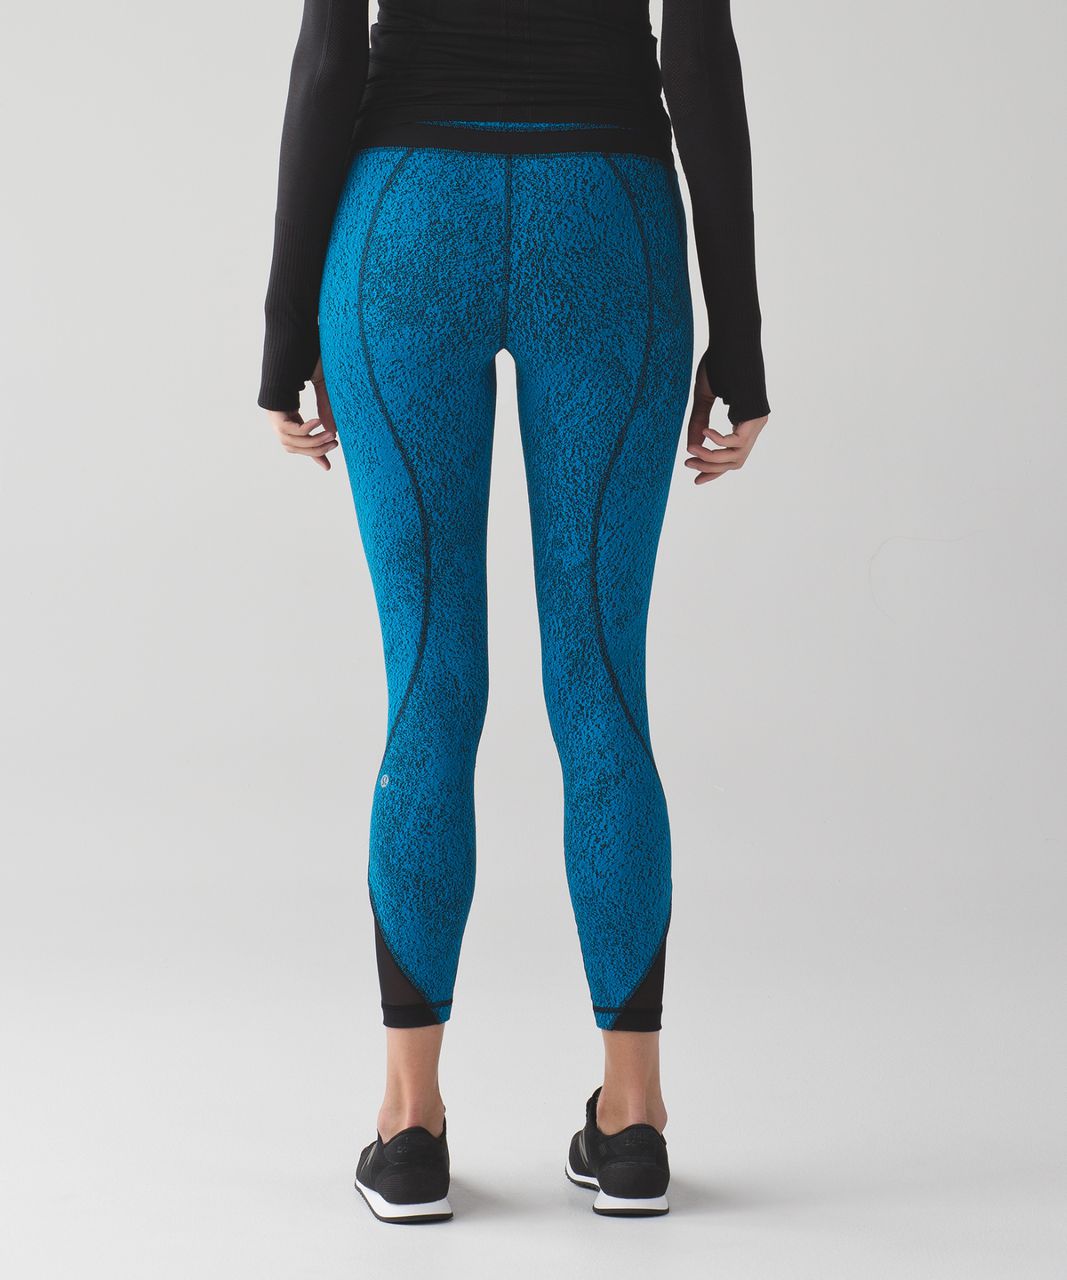 Lululemon Fabric Guide and Tips - Agent Athletica